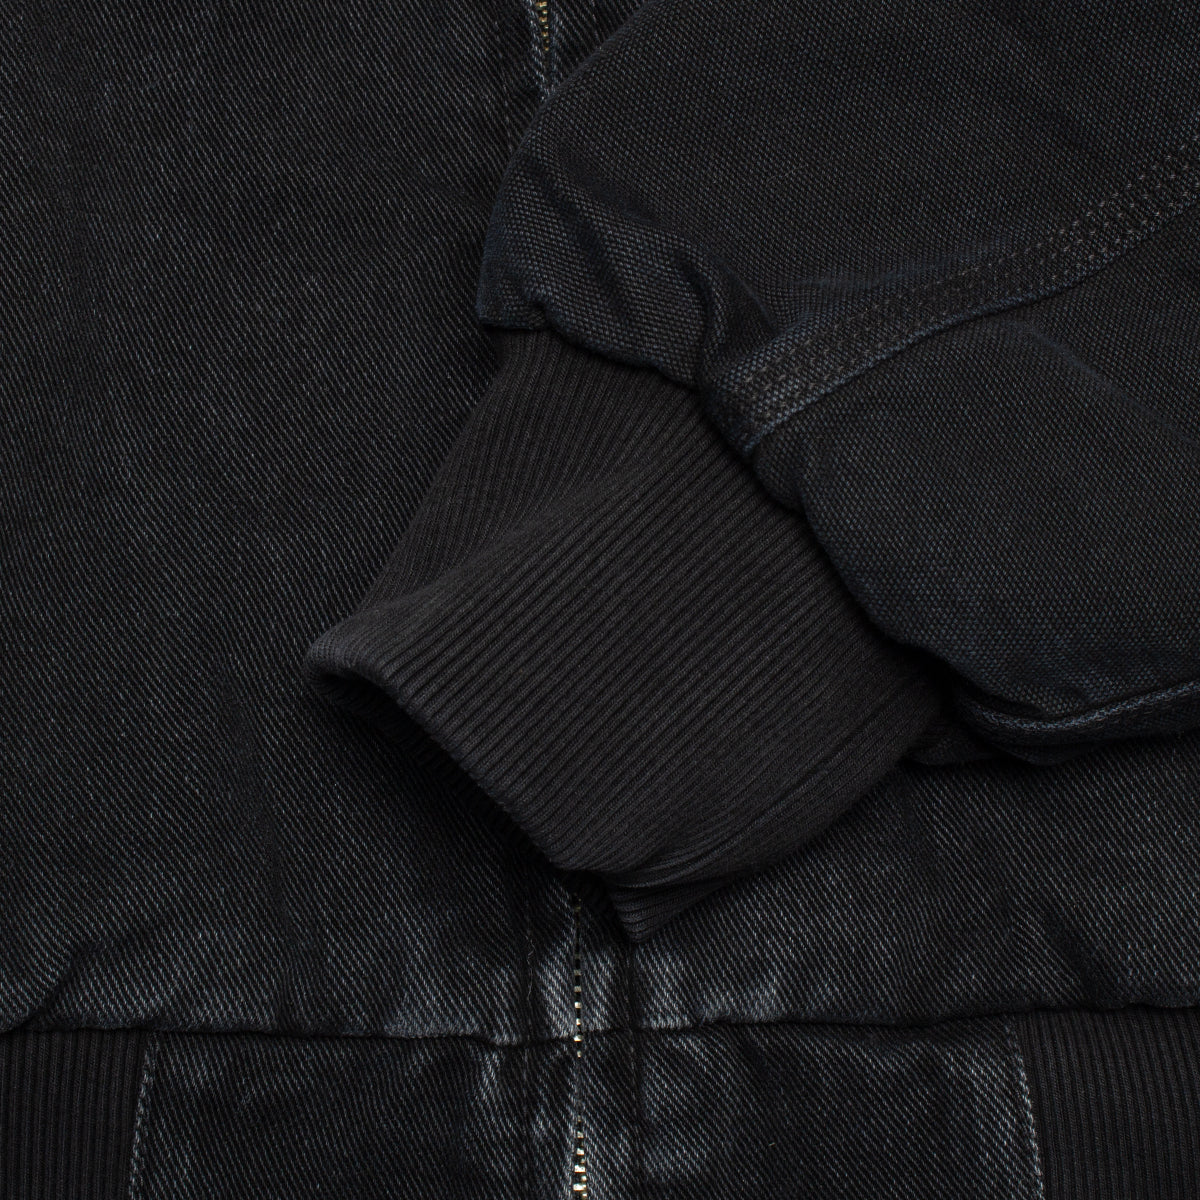 Carhartt WIP | Paxon Bomber Style # I033272-00E Color : Black (Stone Washed)